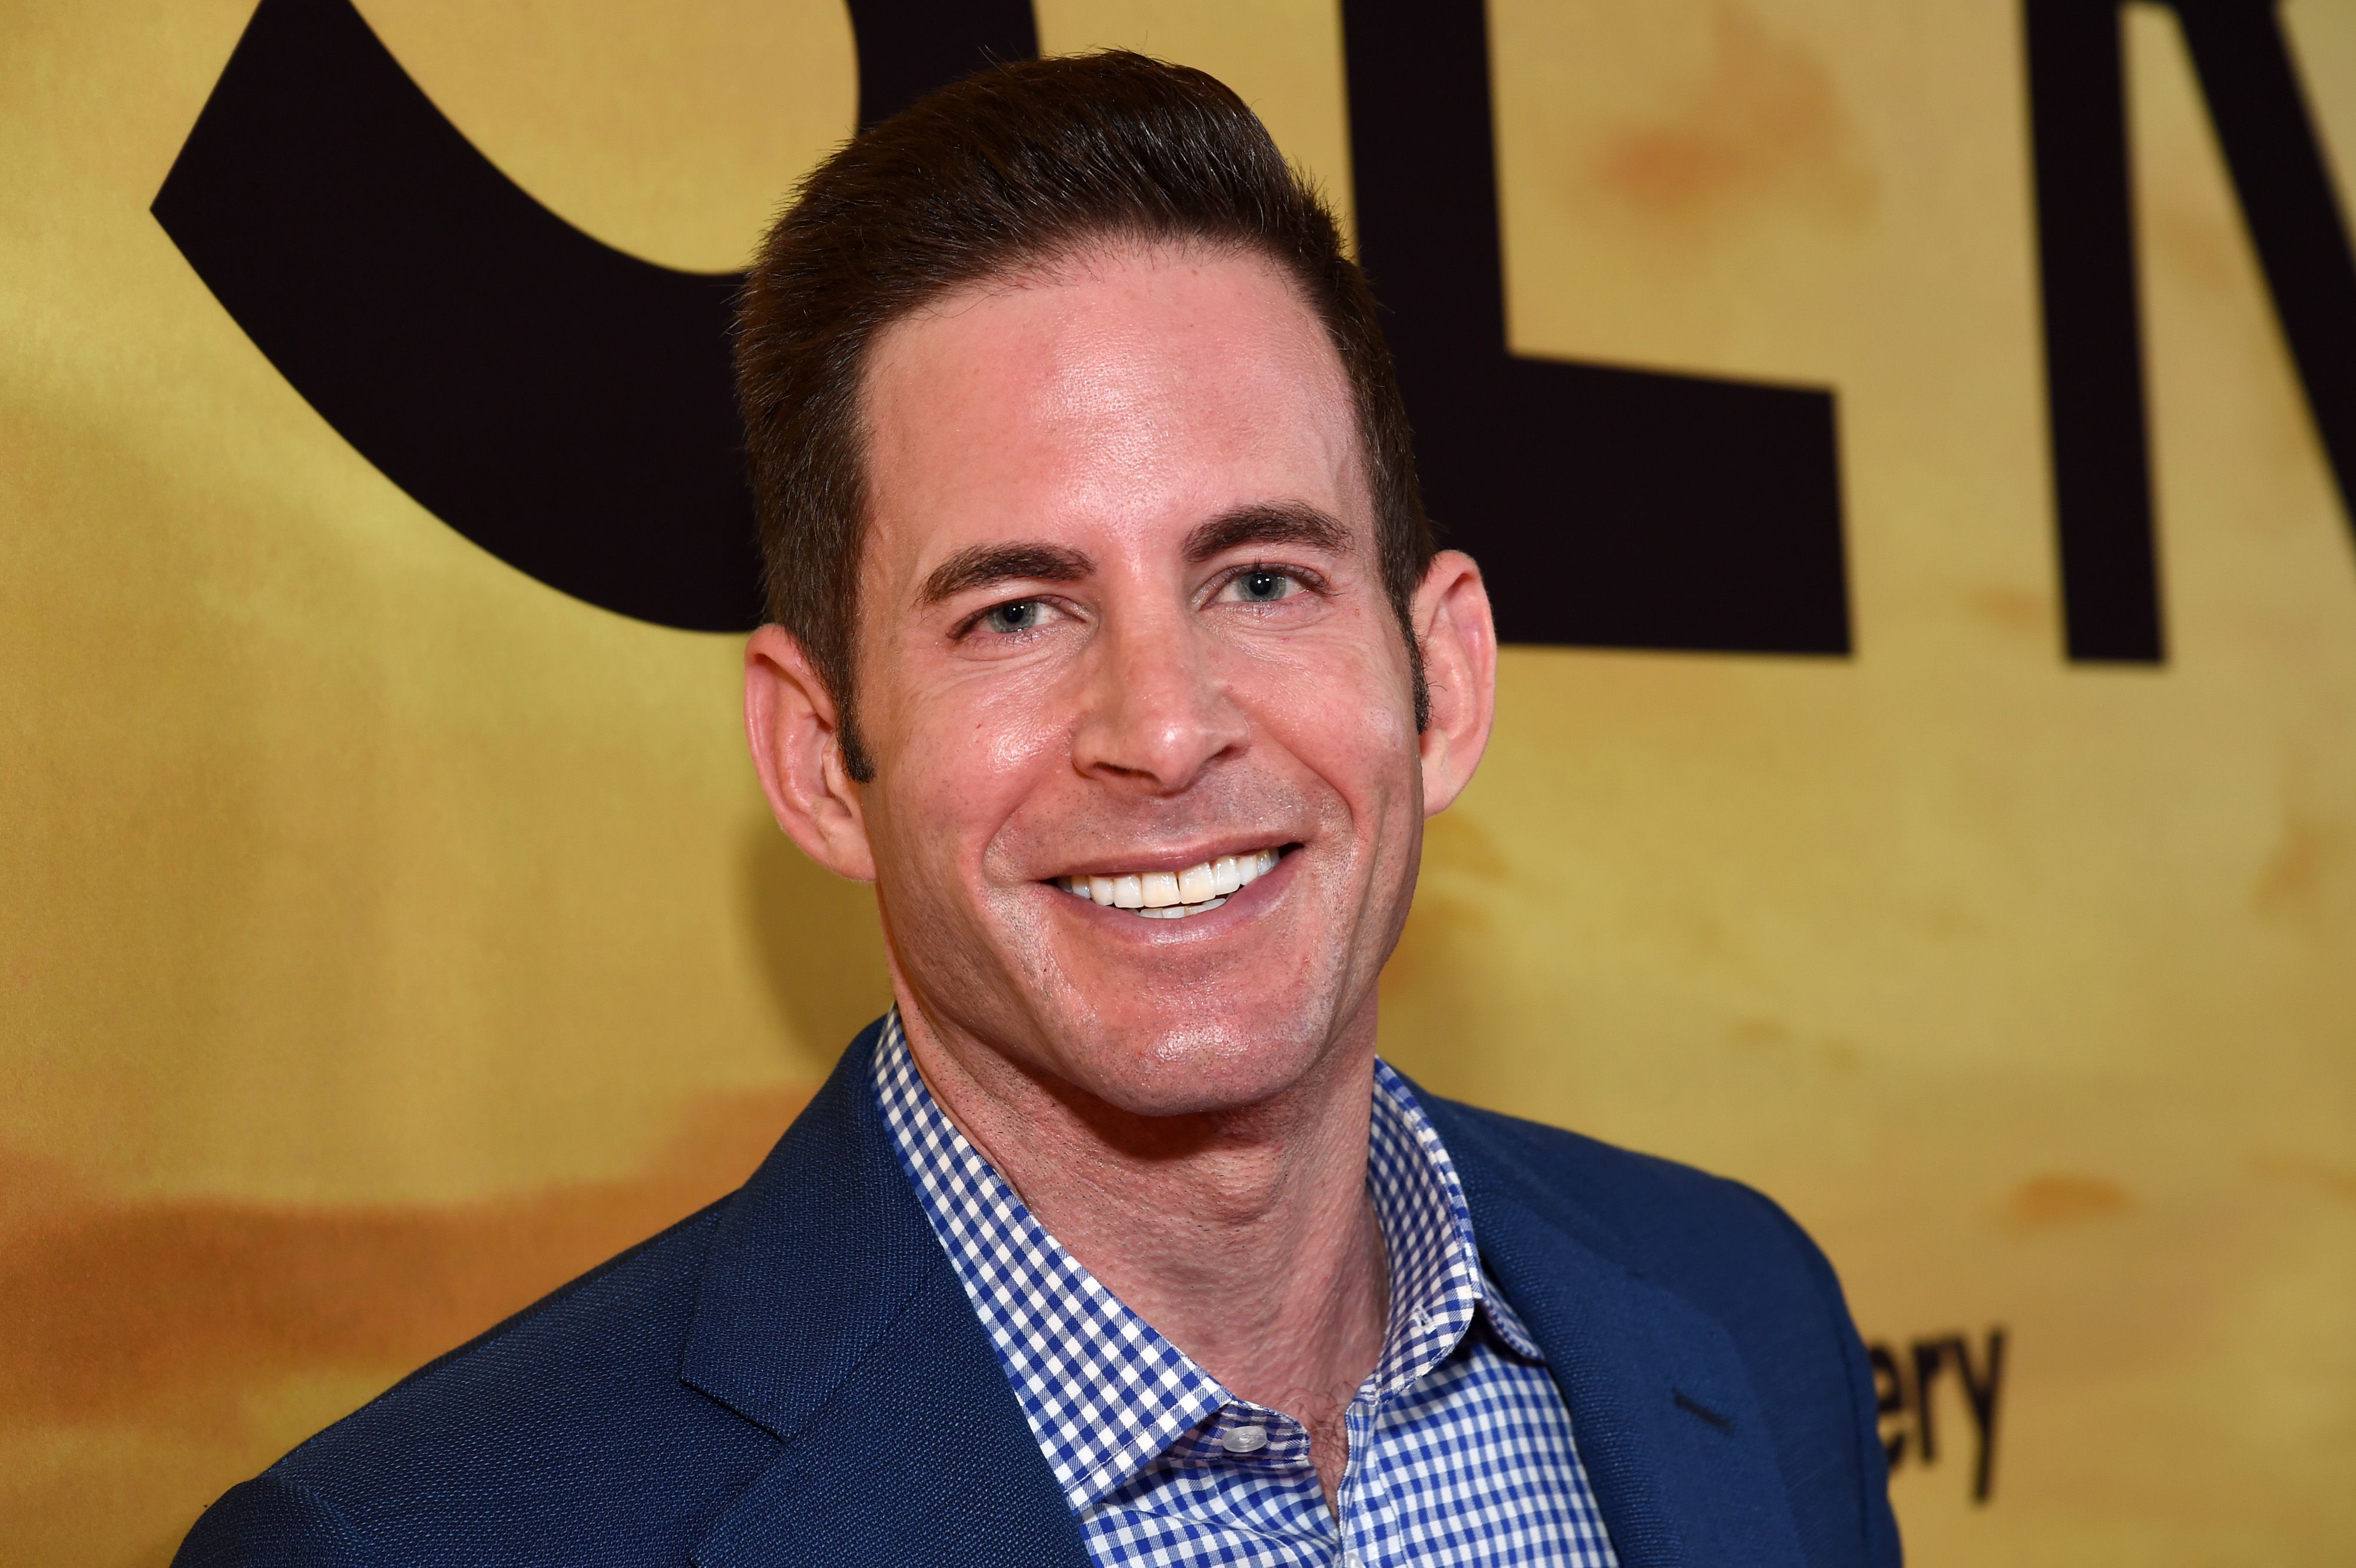 Tarek El Moussa at Discovery's "Serengeti" premiere on July 23, 2019, in Beverly Hills, California | Photo: Michael Kovac/Getty Images